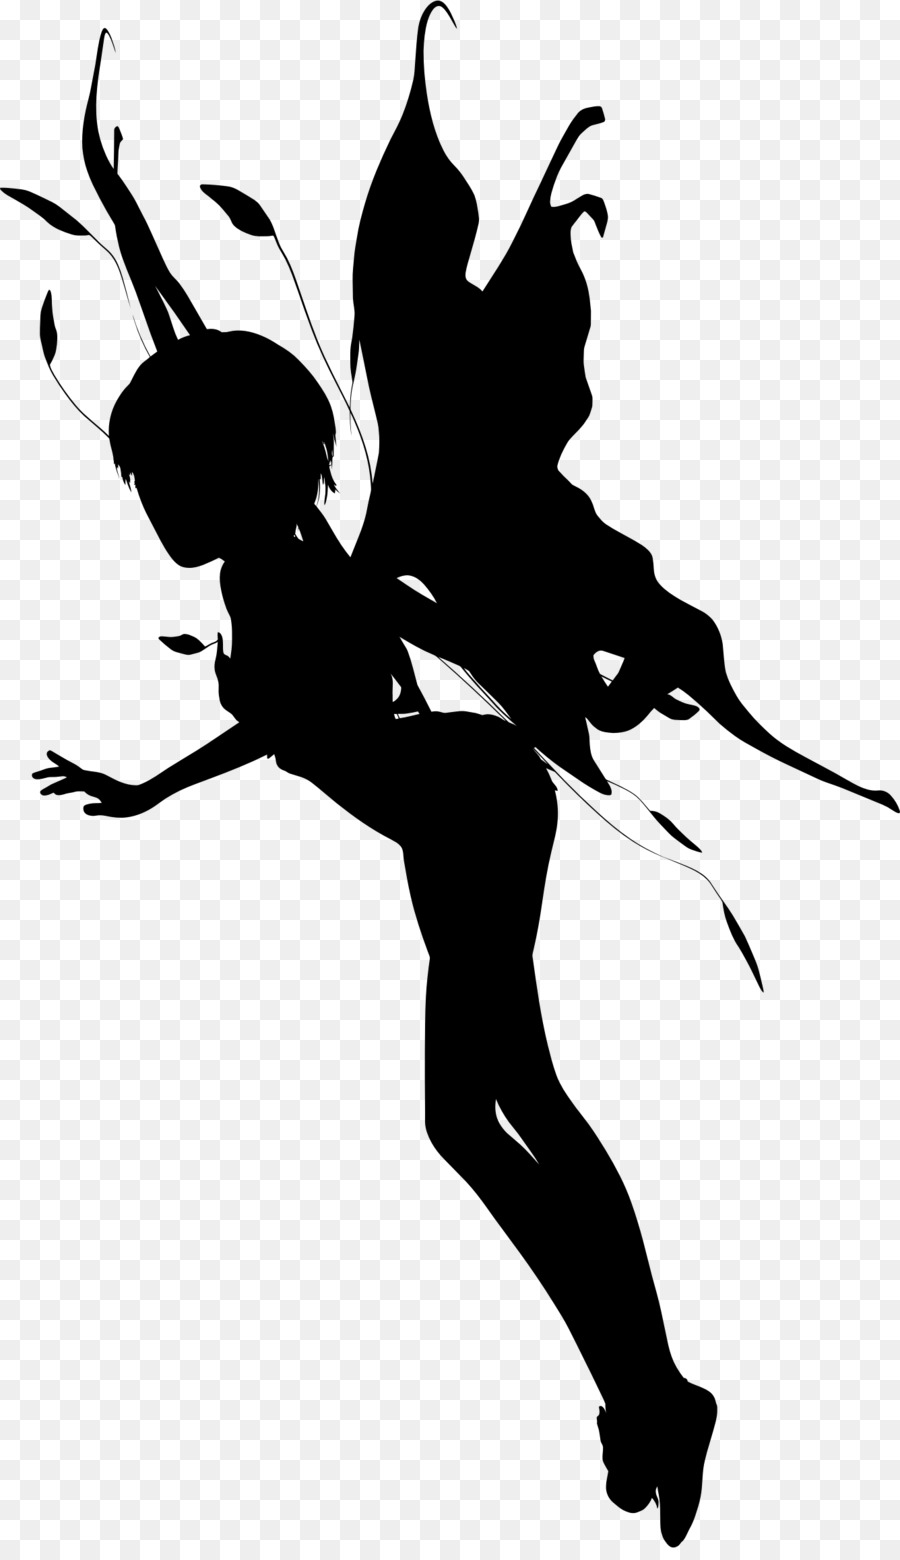 Fairy Silhouette Clip art - fairies png download - 1336*2298 - Free Transparent Fairy png Download.